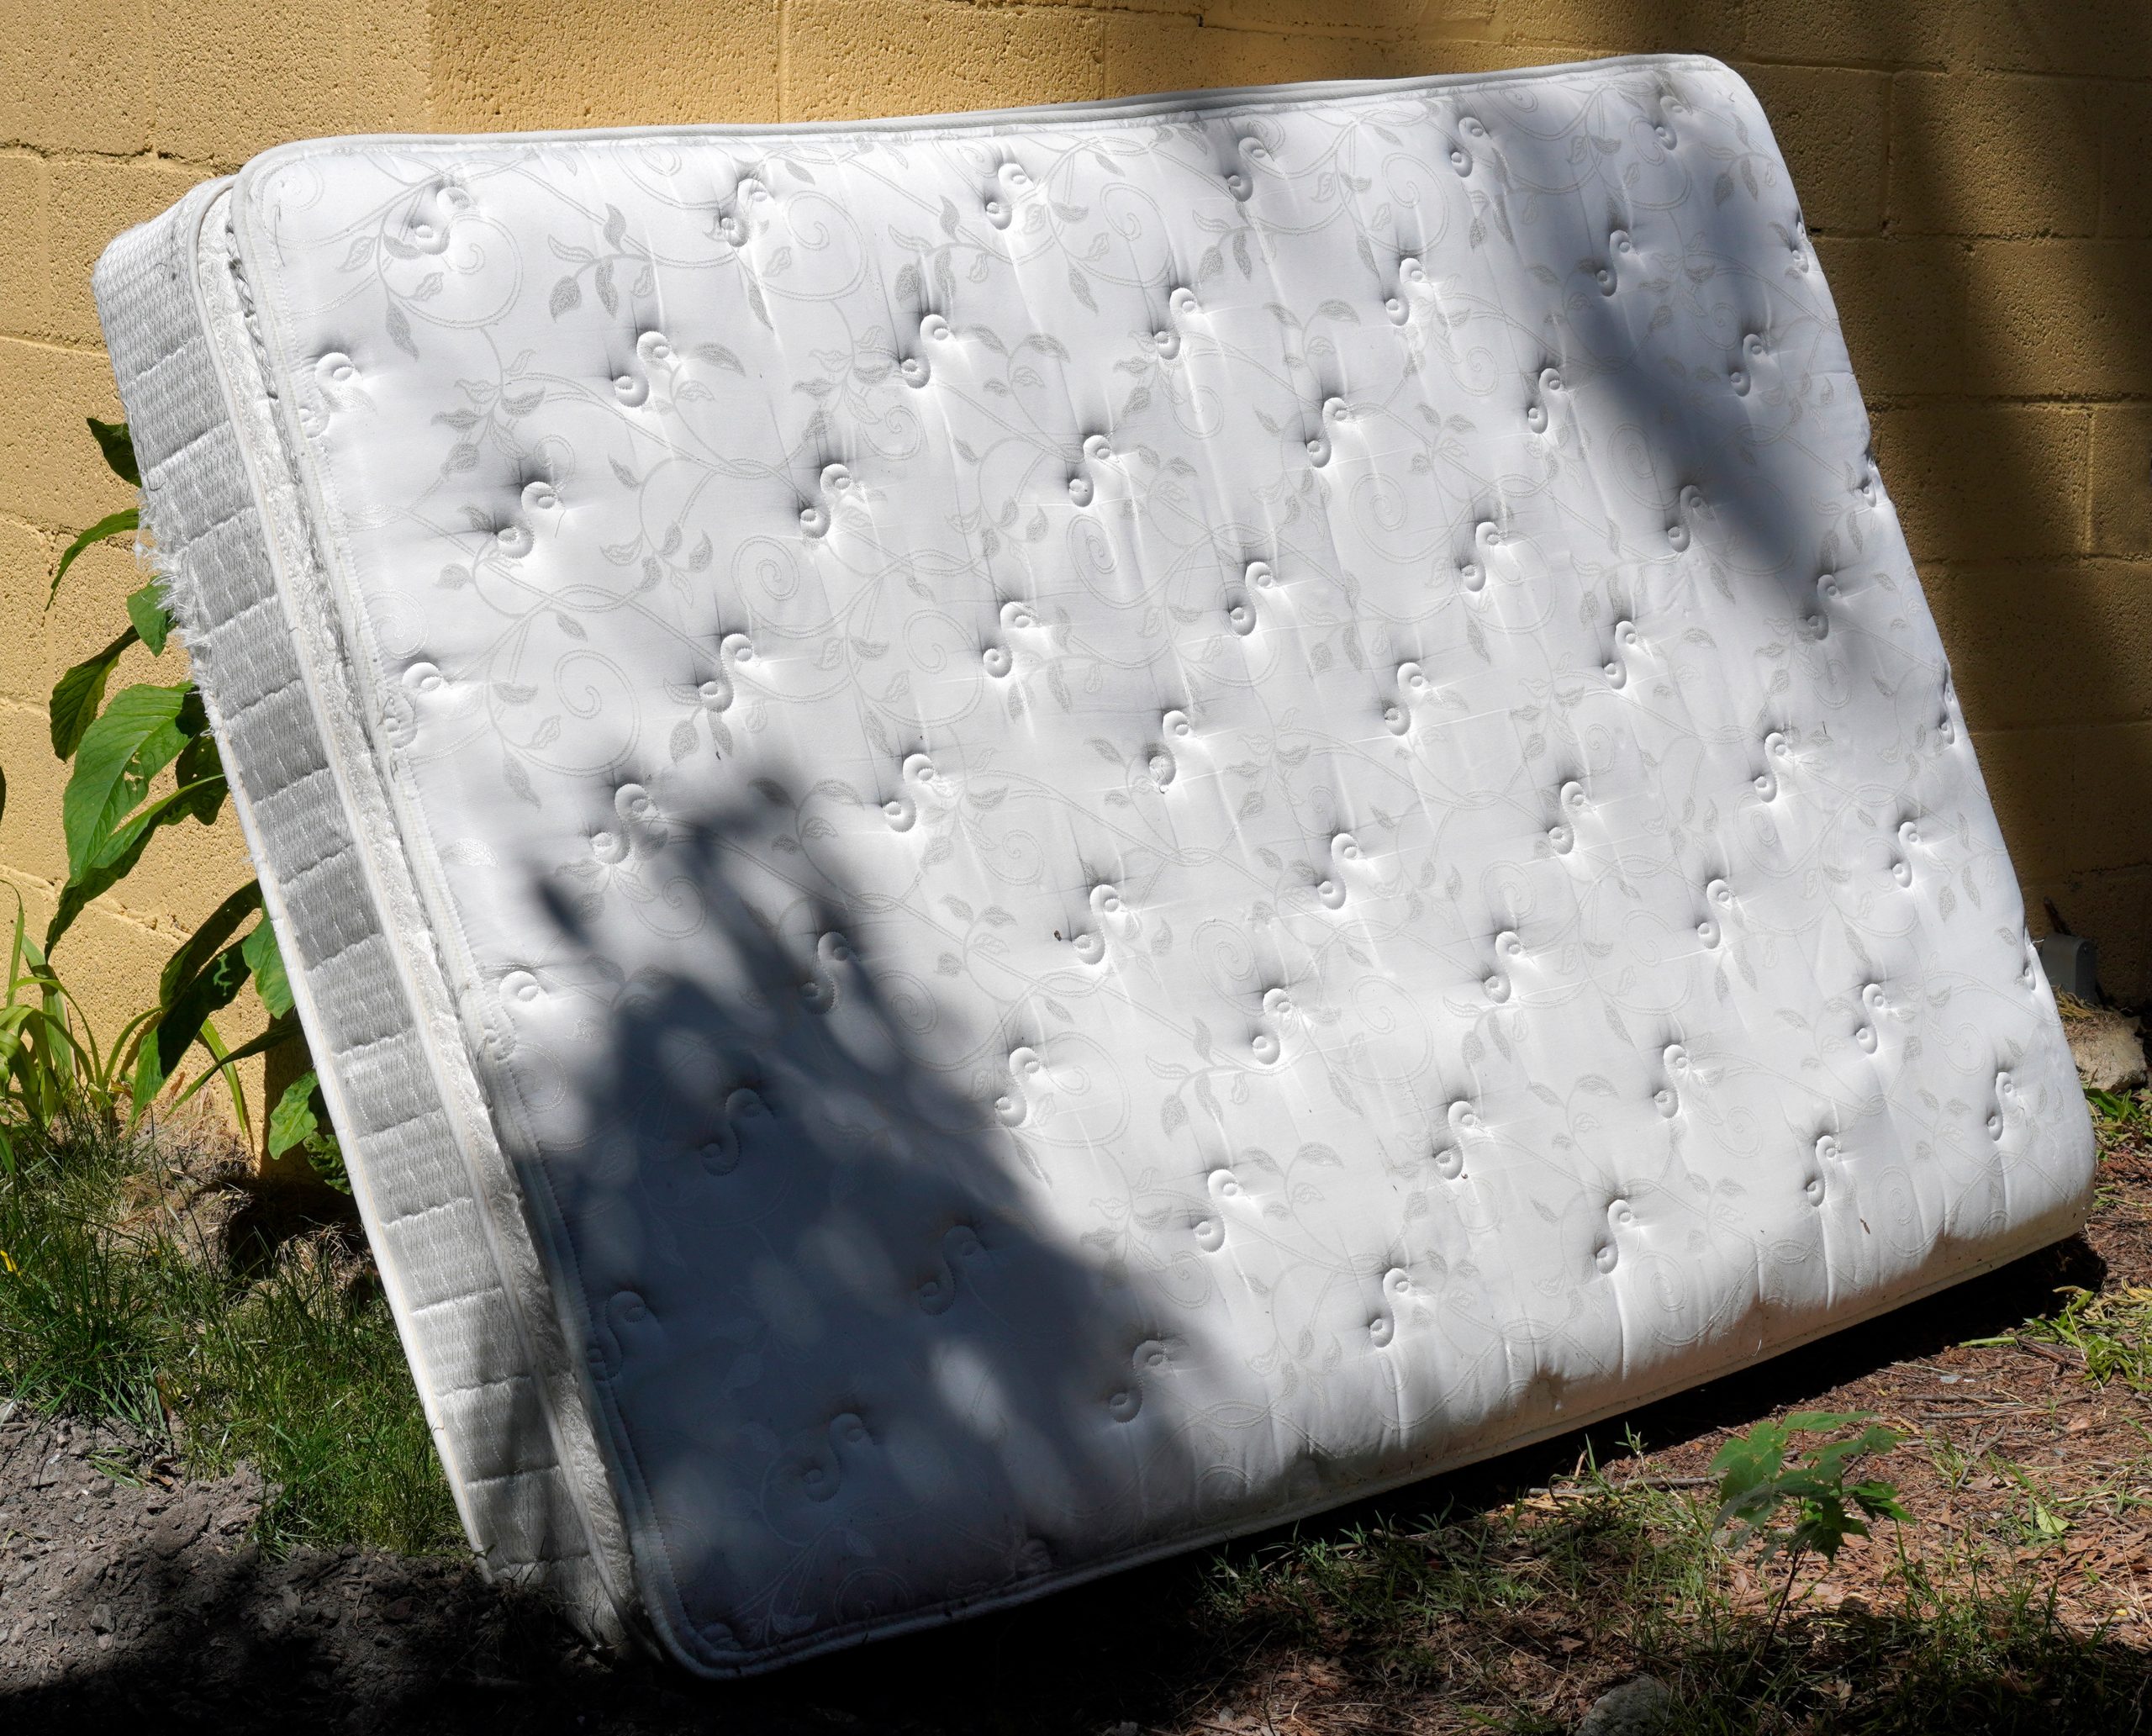 nasty used old mattress leaning against a wall that was improperly disposed of